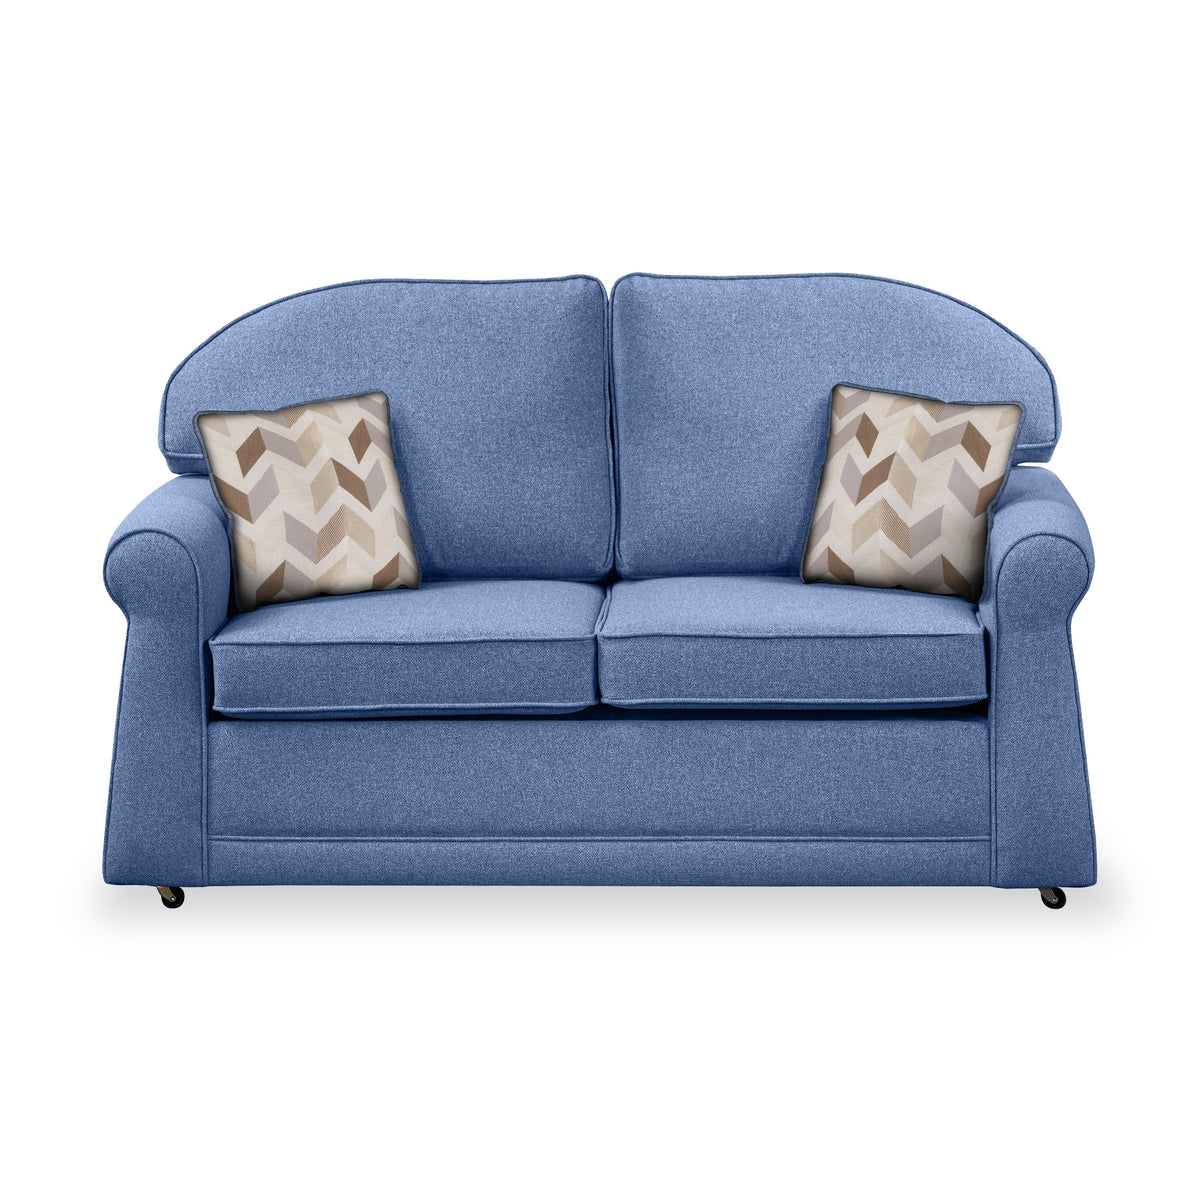 Croxdon Denim Faux Linen 2 Seater Sofabed with Oatmeal Scatter Cushions from Roseland Furniture